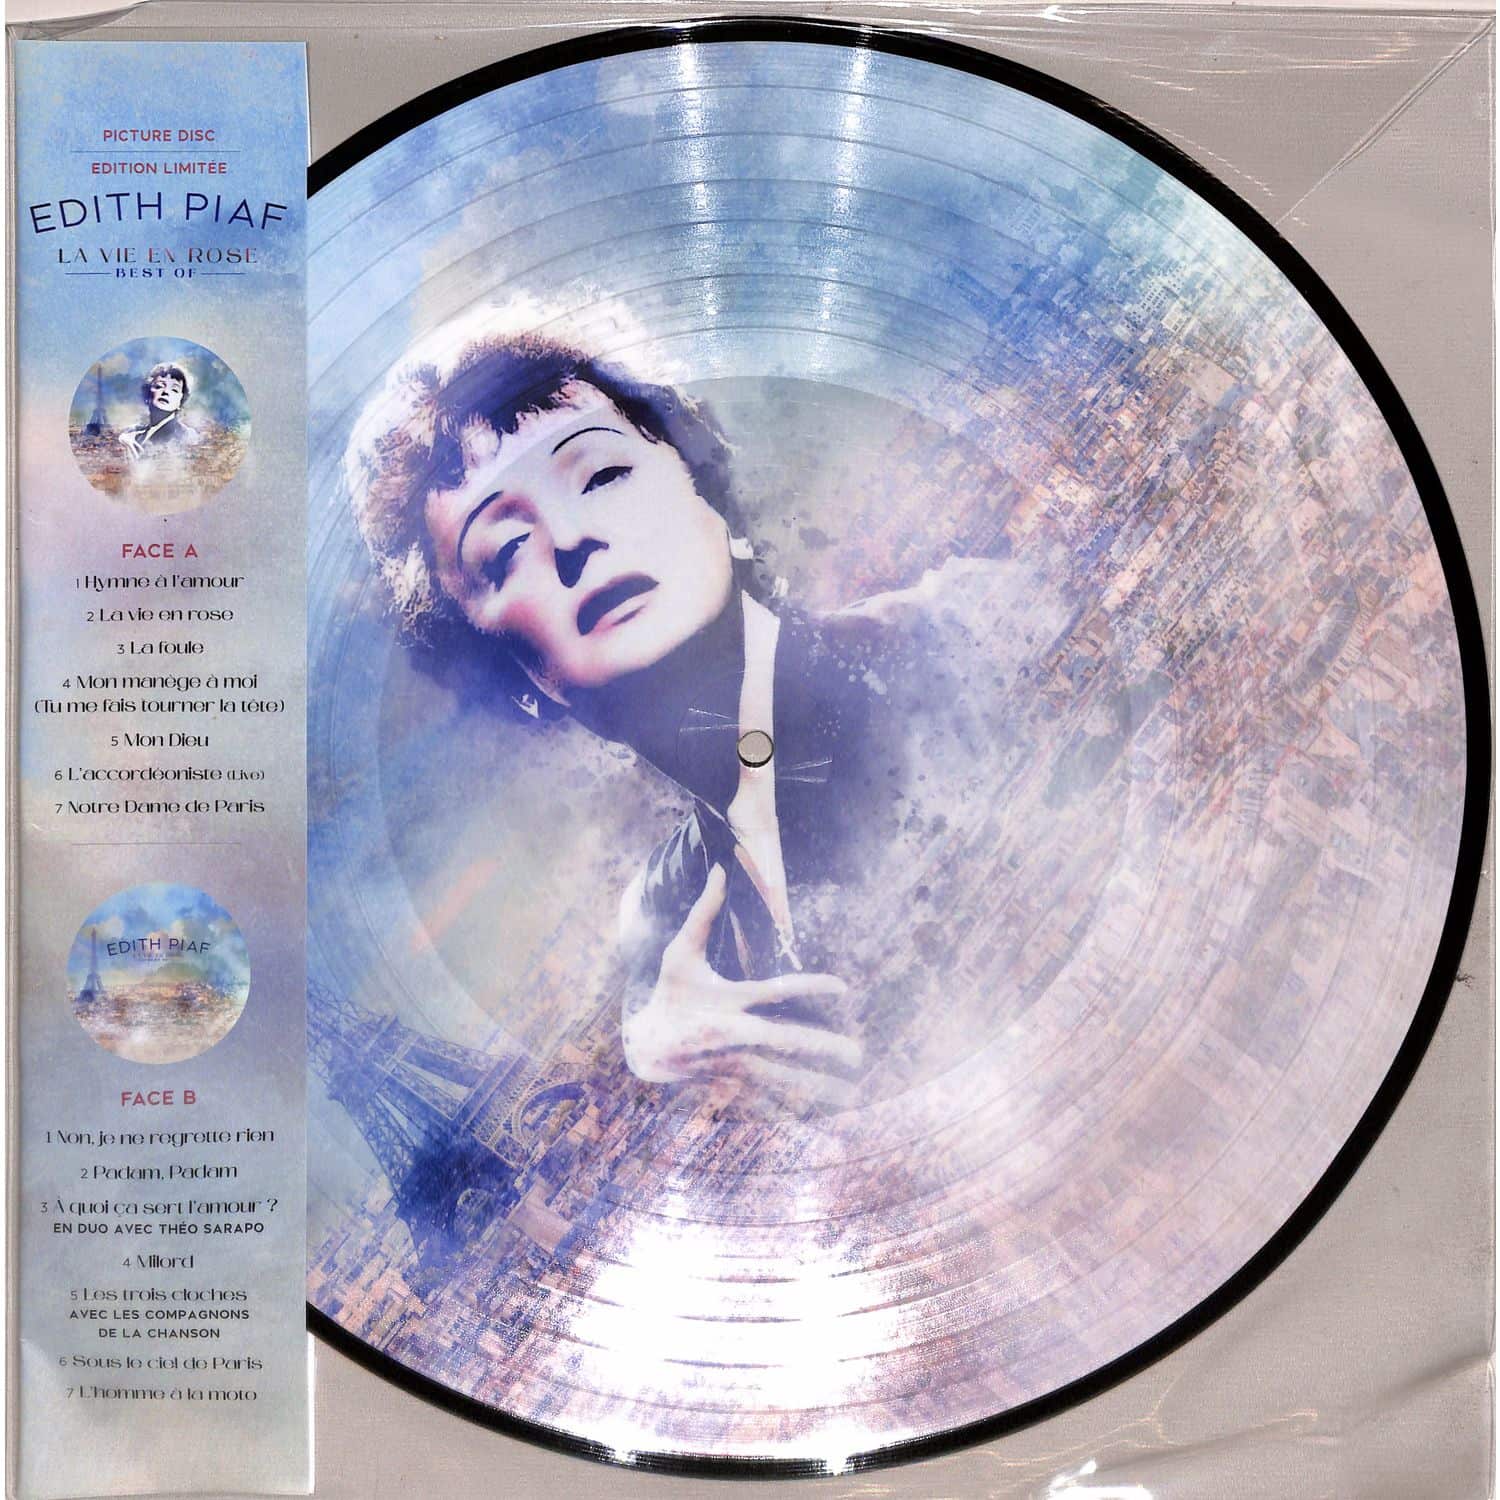 Edith Piaf - BEST OF PICTURE DISC 